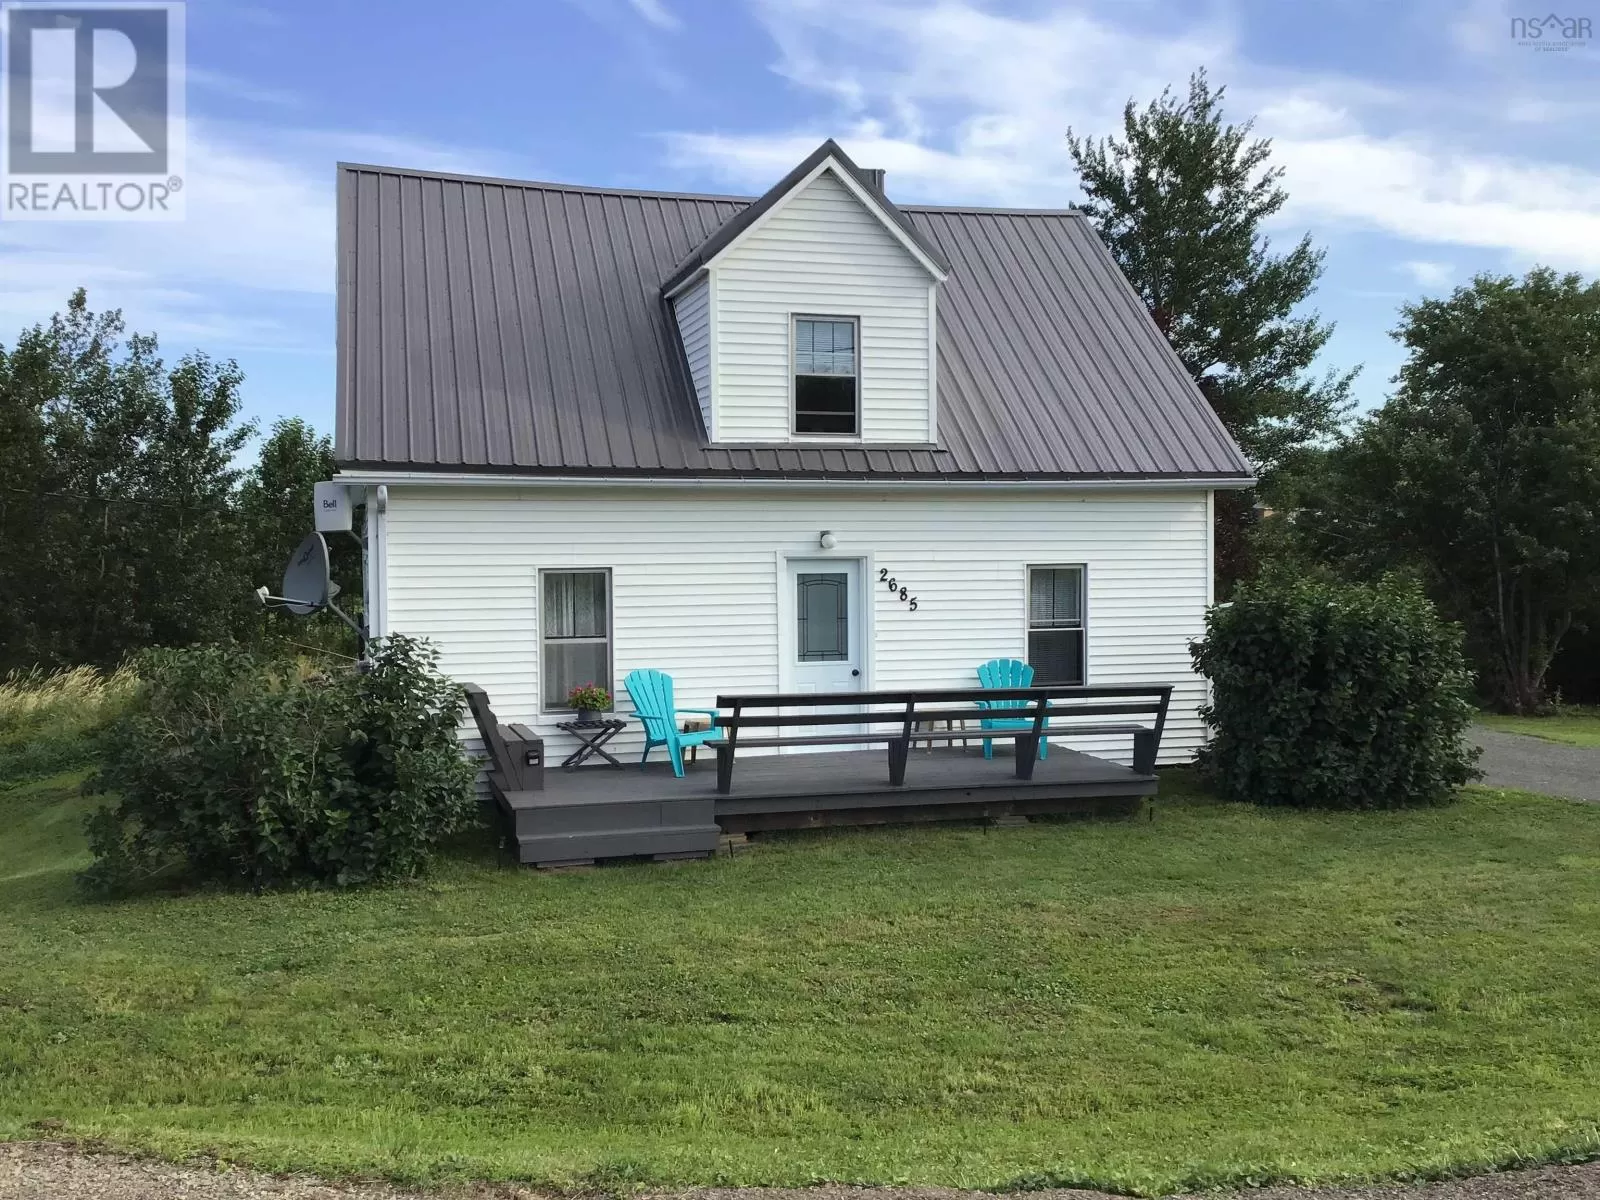 House for rent: 2685 Summerside Road, Tracadie, Nova Scotia B0H 1W0